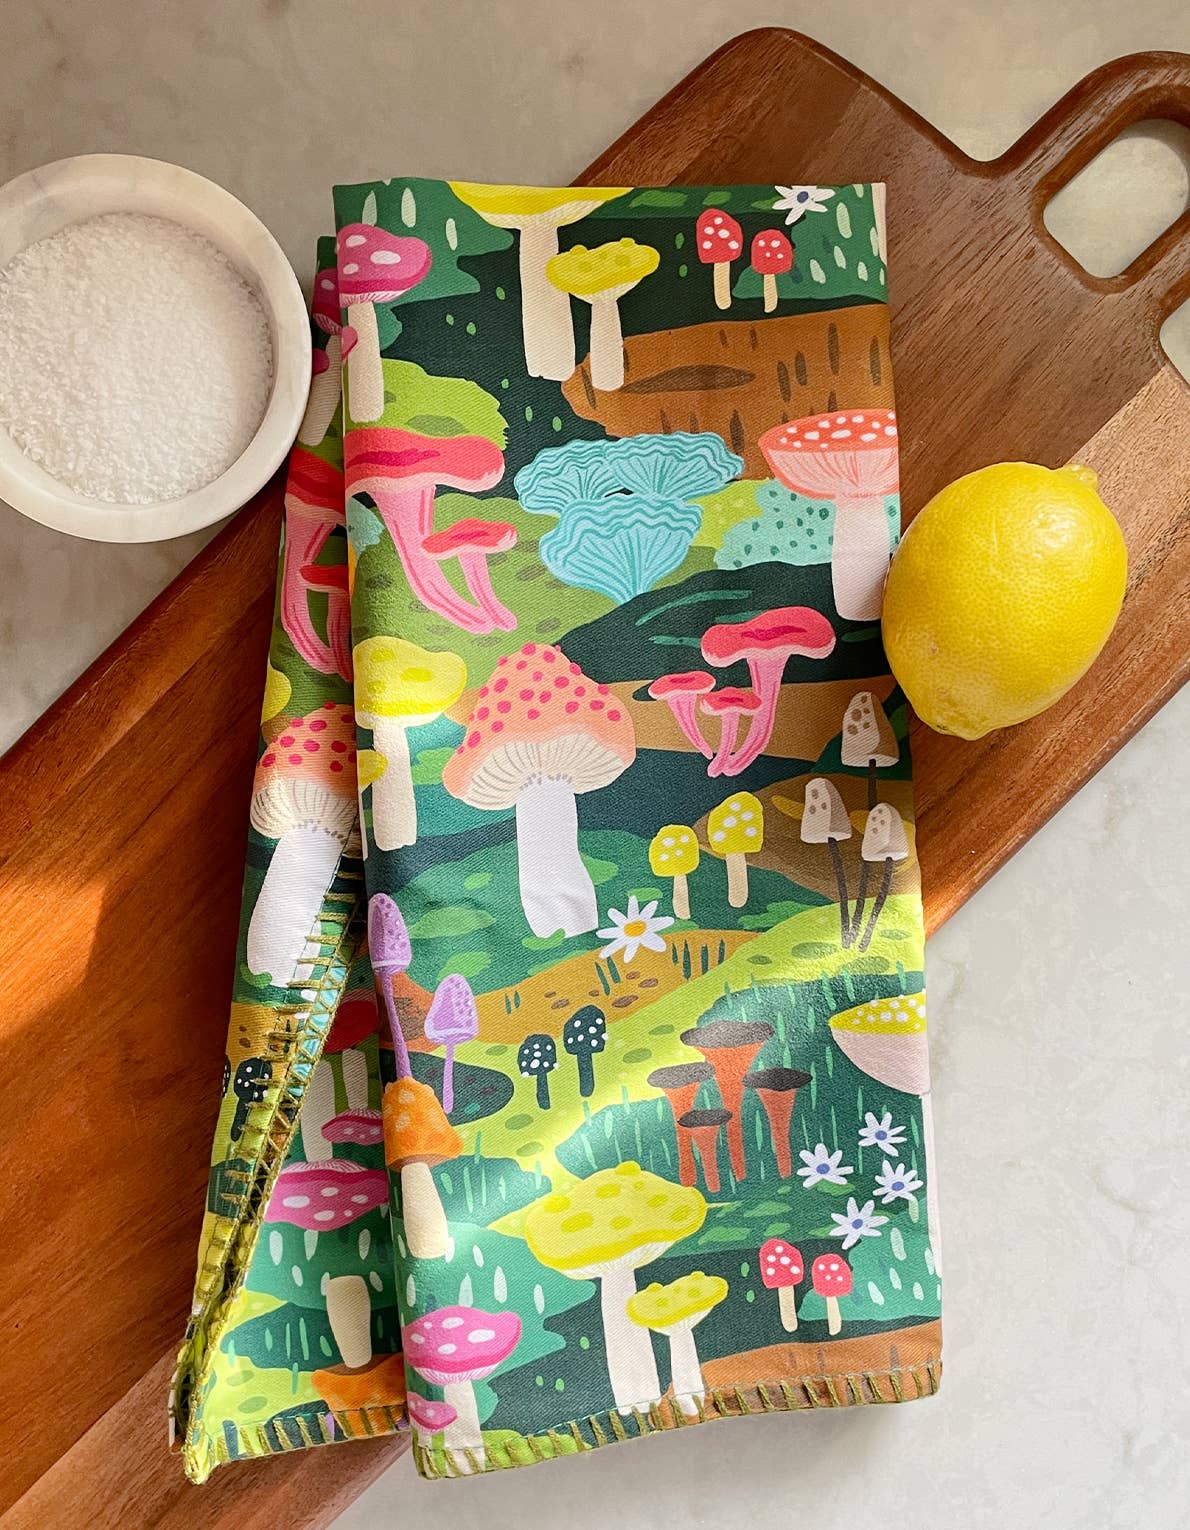 Colorful mushroom tea towel. Shown here on cutting board with a lemon and bowl of salt 